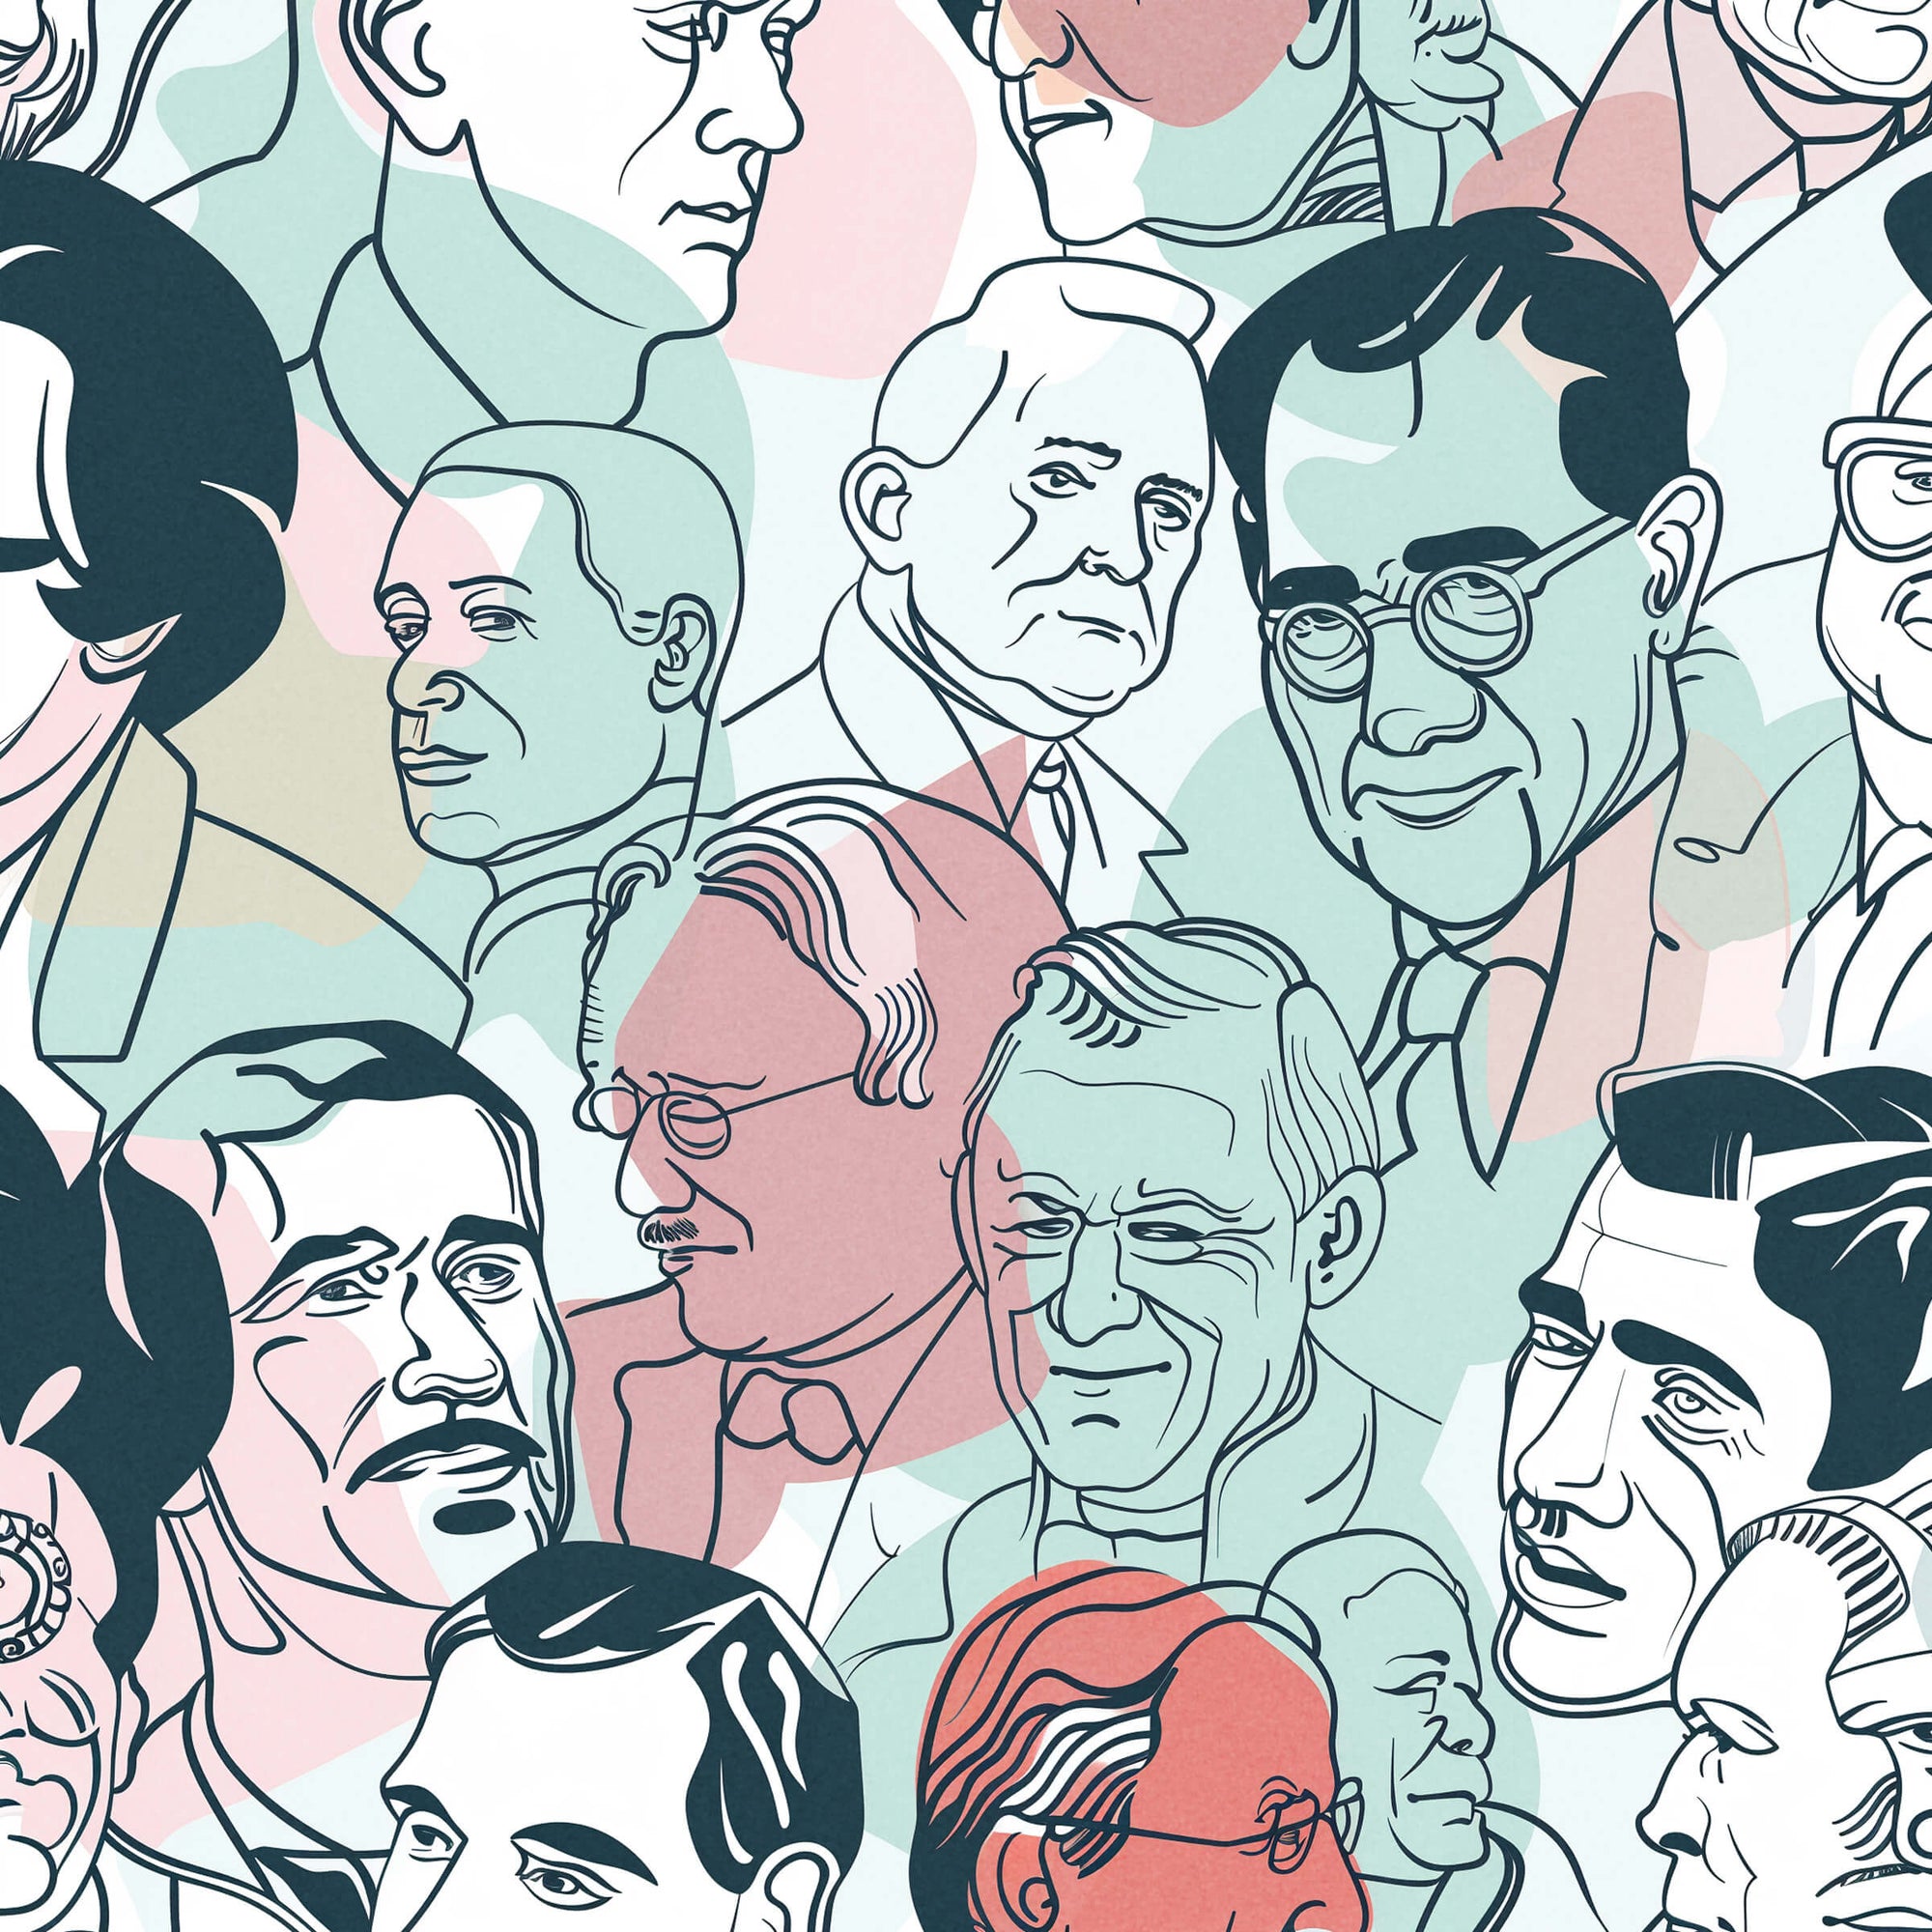 Portrait art of famous Americans in a modern style